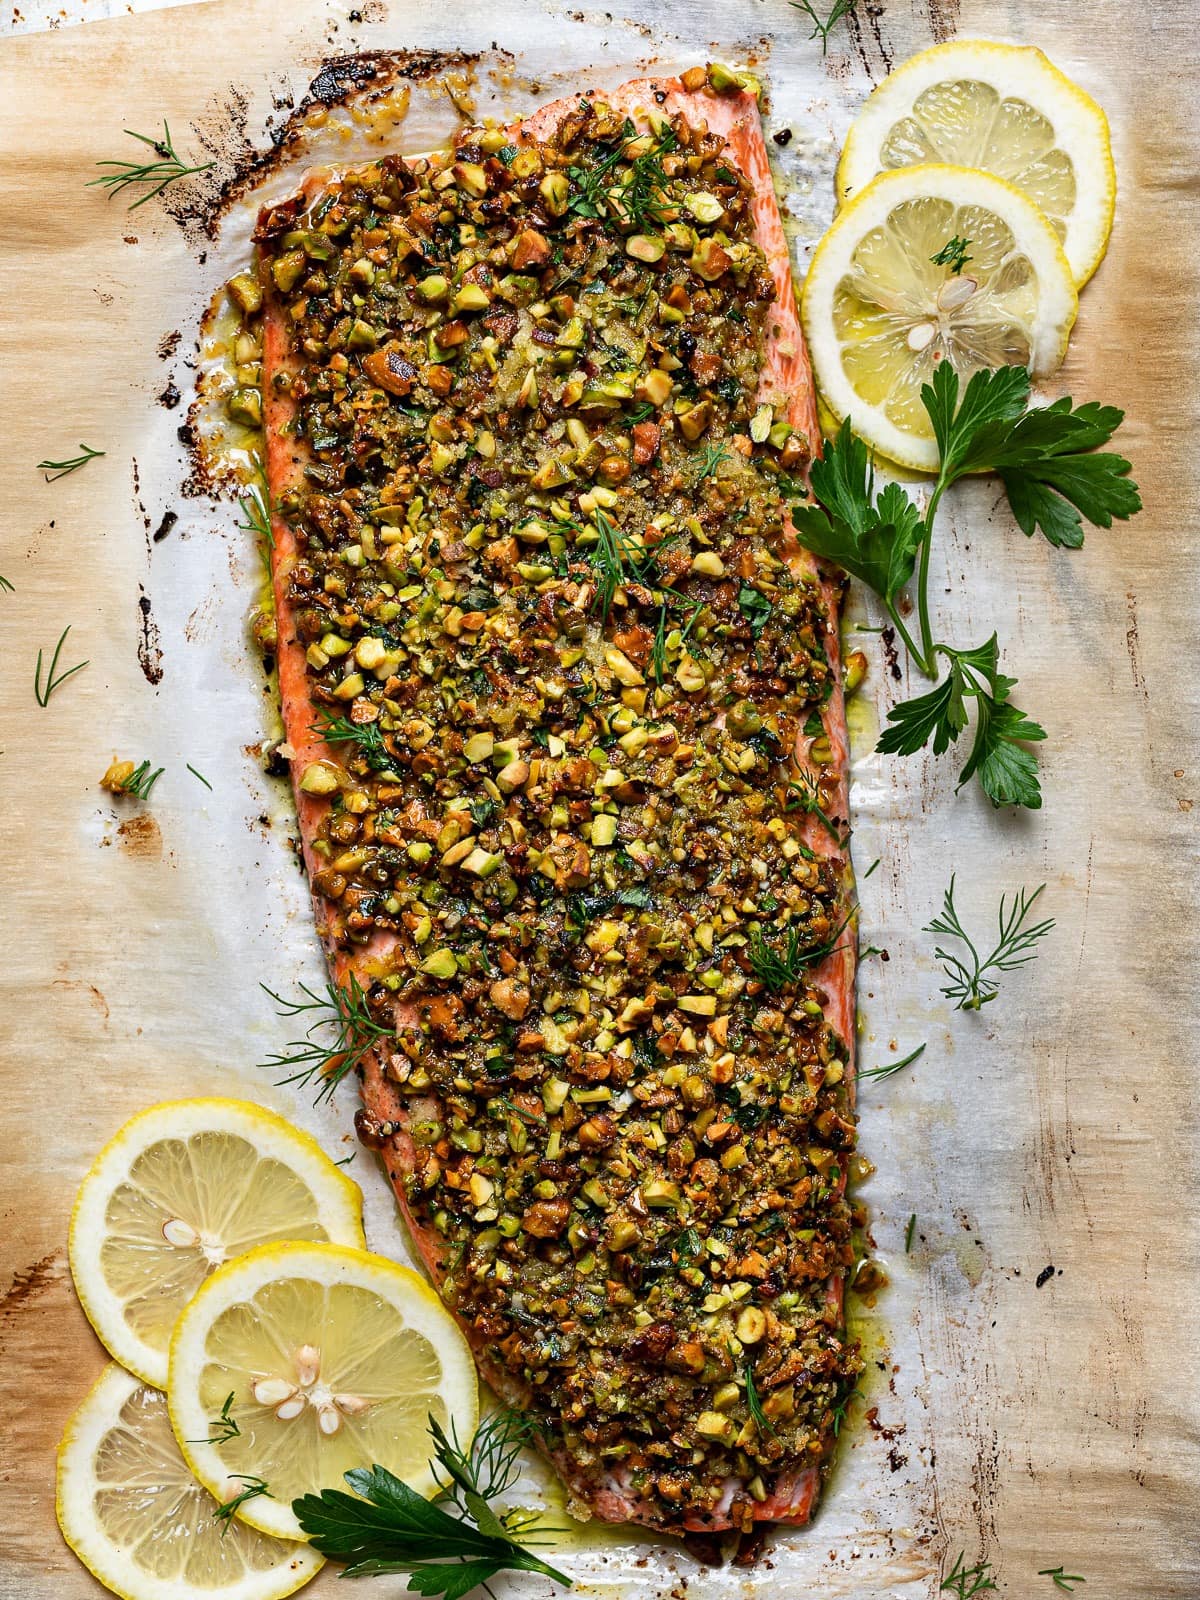 Pistachio crusted salmon on a wooden board garnished with lemon slices. 